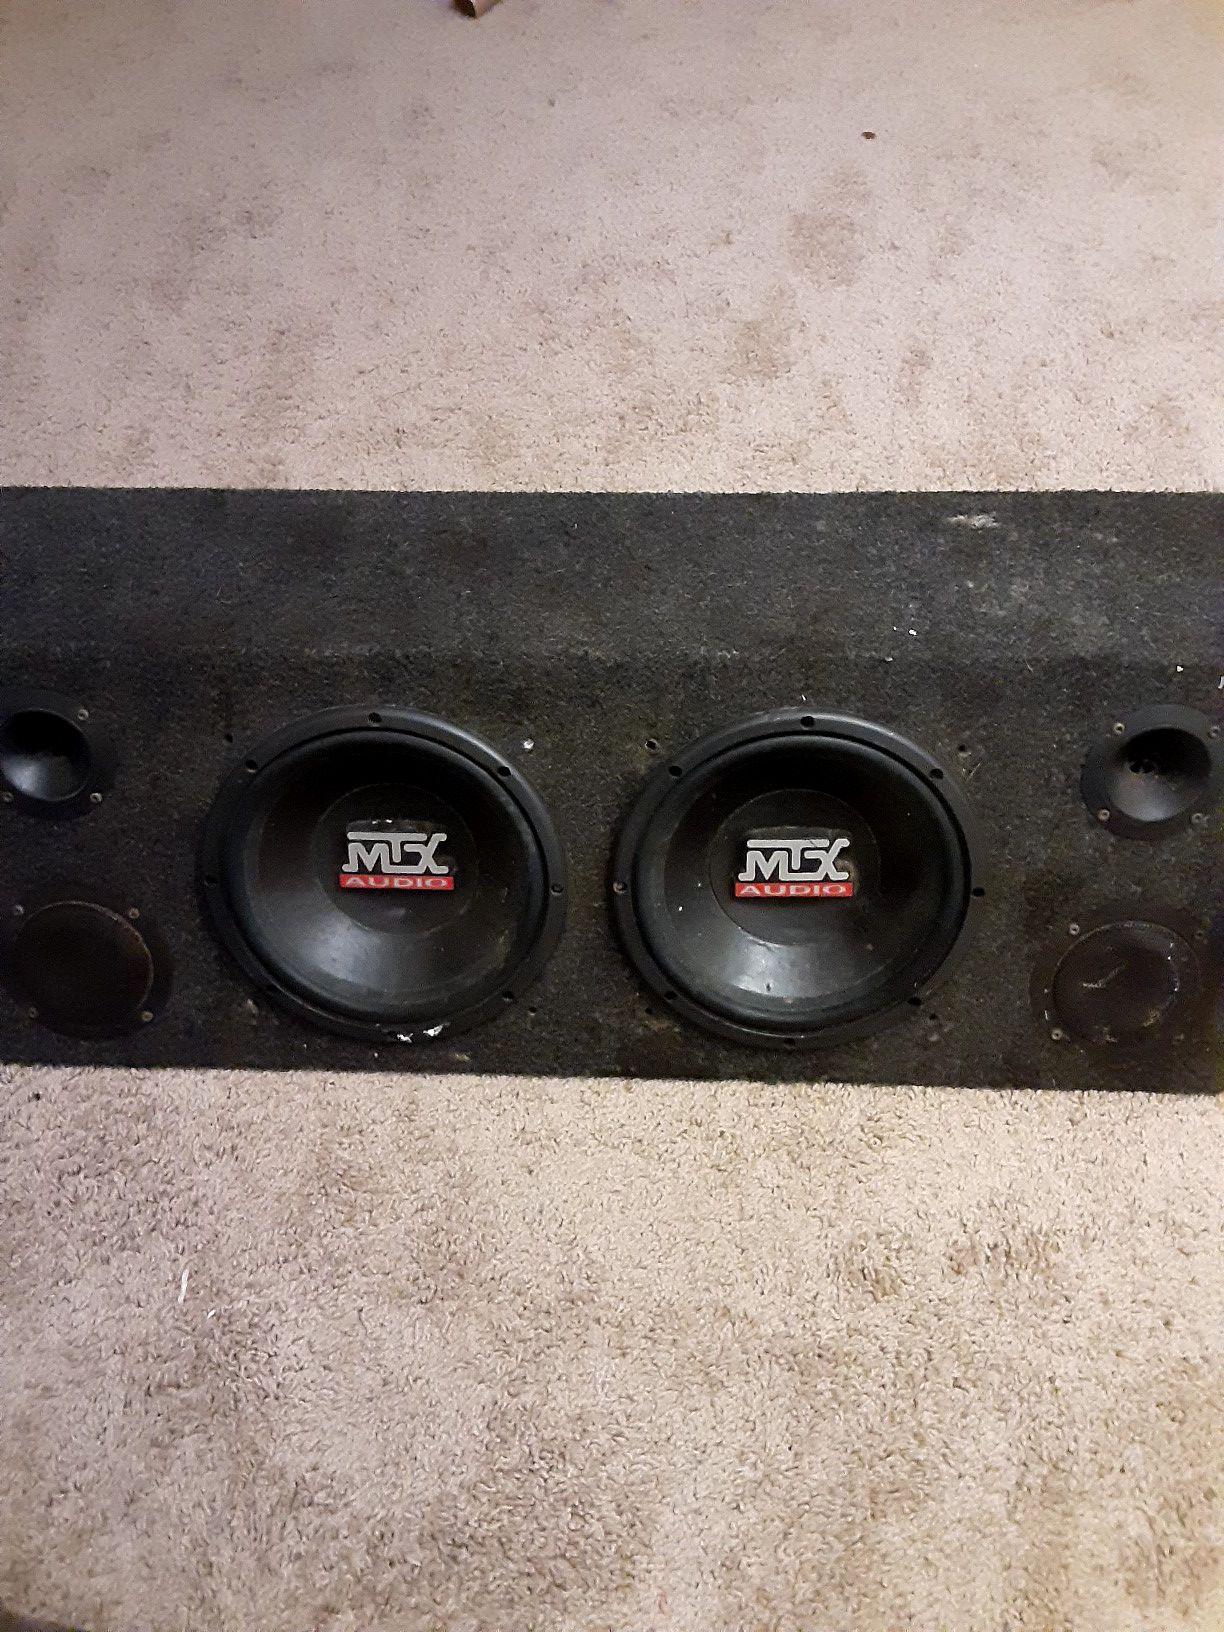 MTX Audio Subs W/2 channel 800W amp.